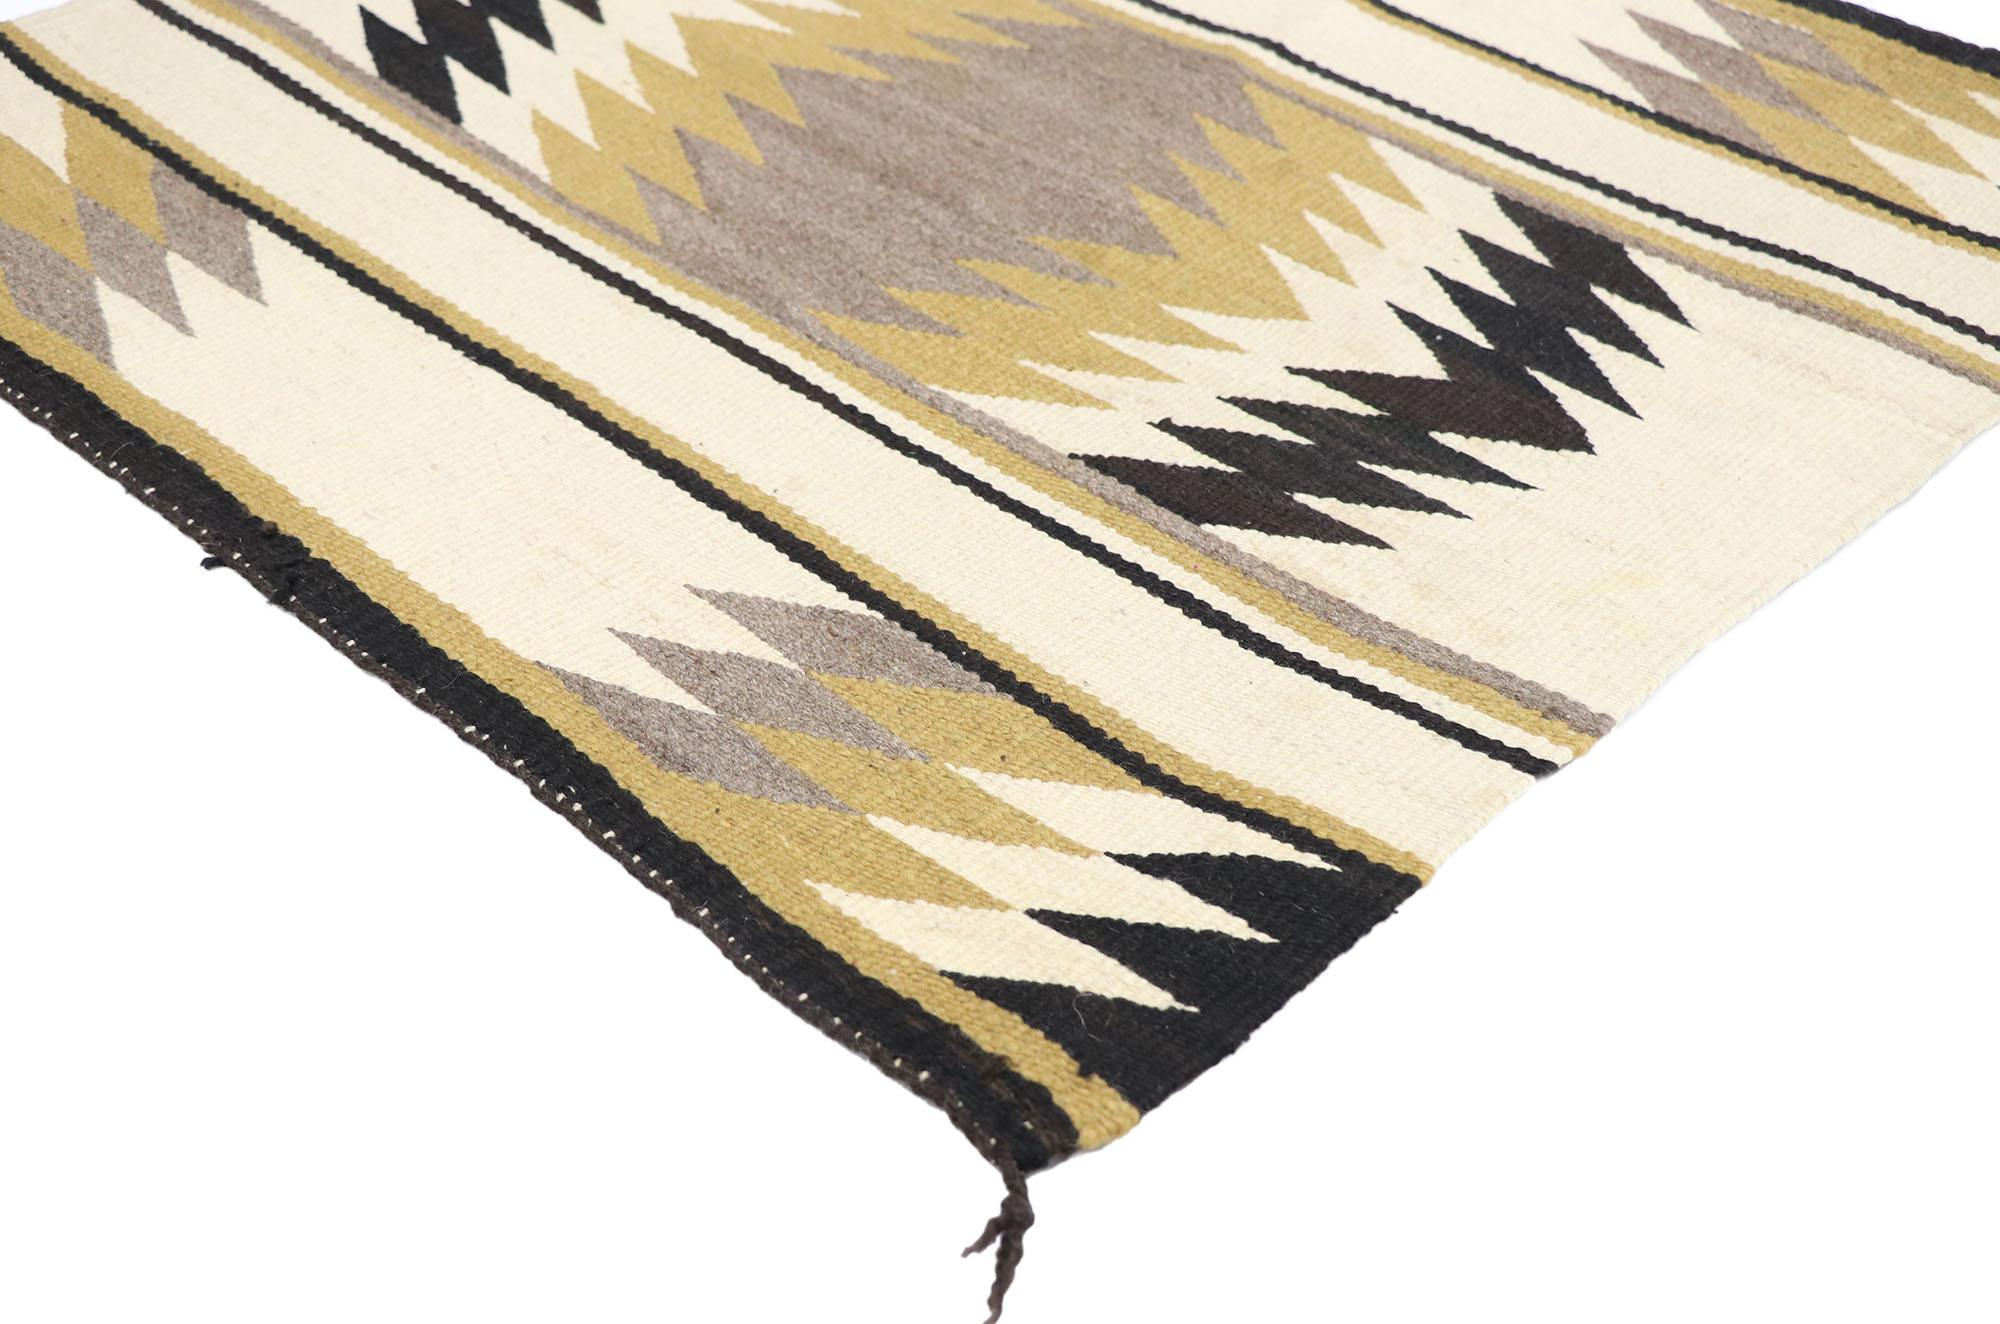 77872, vintage Navajo Kilim rug with Two Grey Hills style9. With its bold expressive design, incredible detail and texture, this hand-woven wool vintage Navajo Kilim rug is a captivating vision of woven beauty highlighting Native American style with